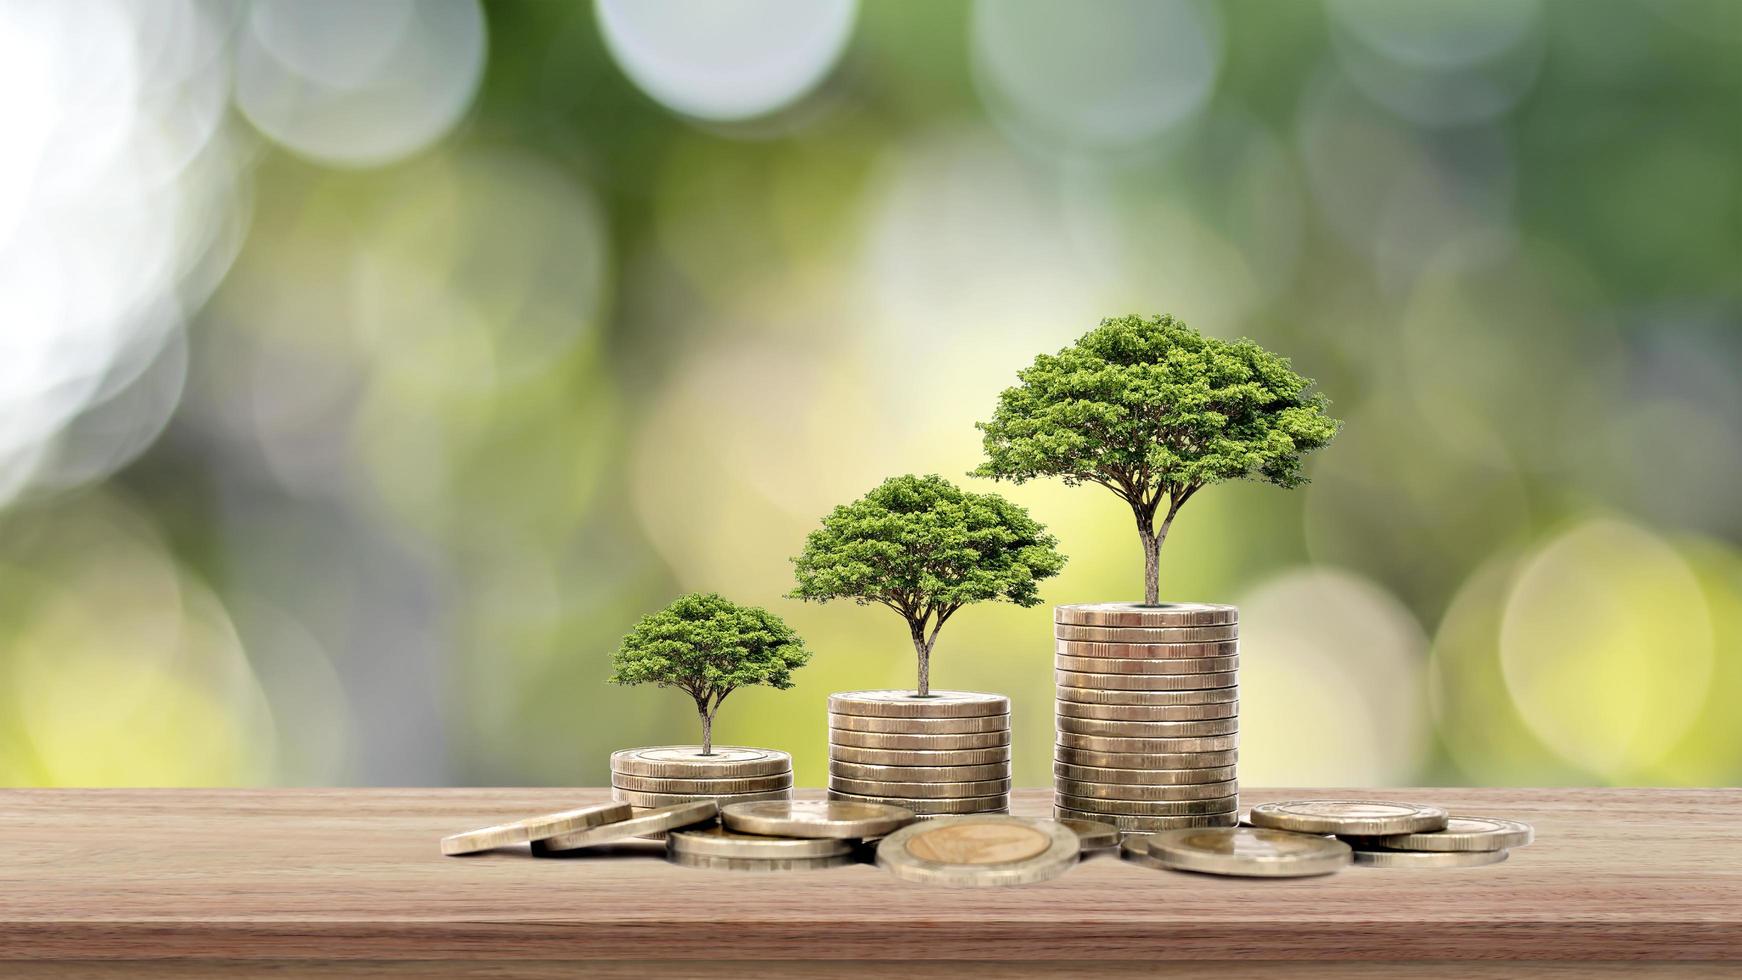 The tree grows on a stack of money on a wooden table and natural background, the concept of financial investment and economic expansion photo